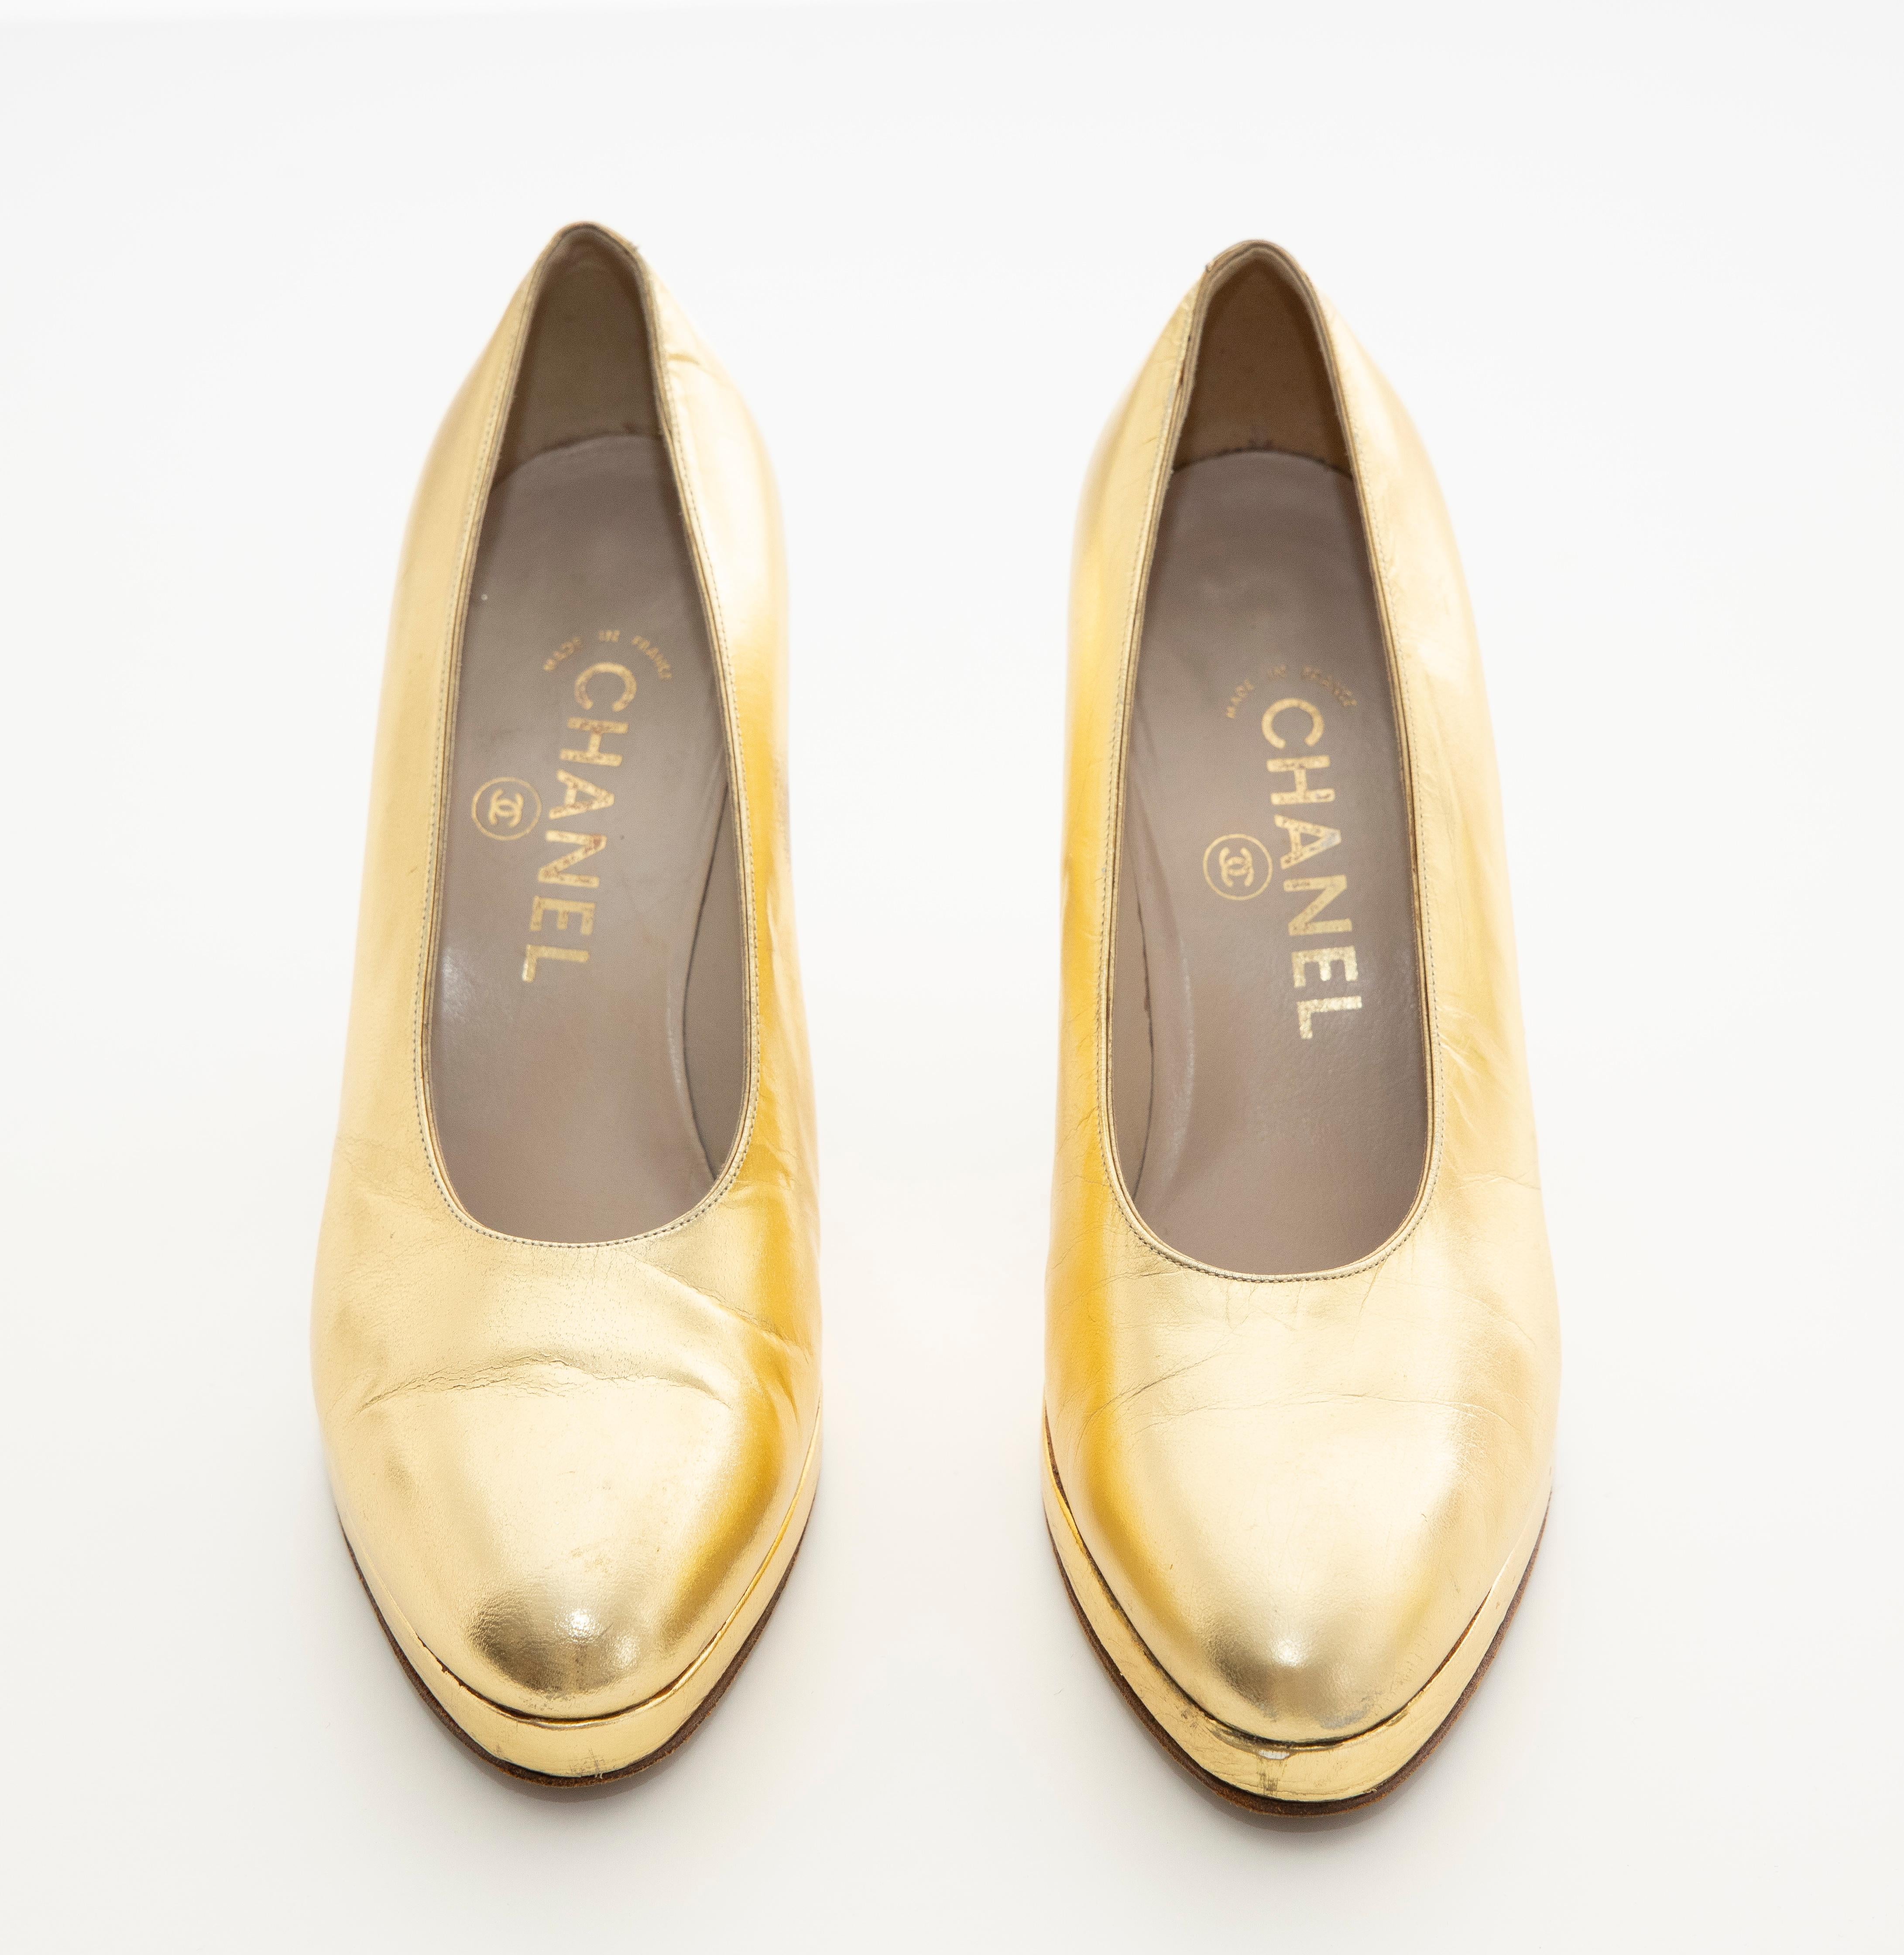 Chanel Metallic Gold Leather Pumps, Fall 1996 For Sale 5